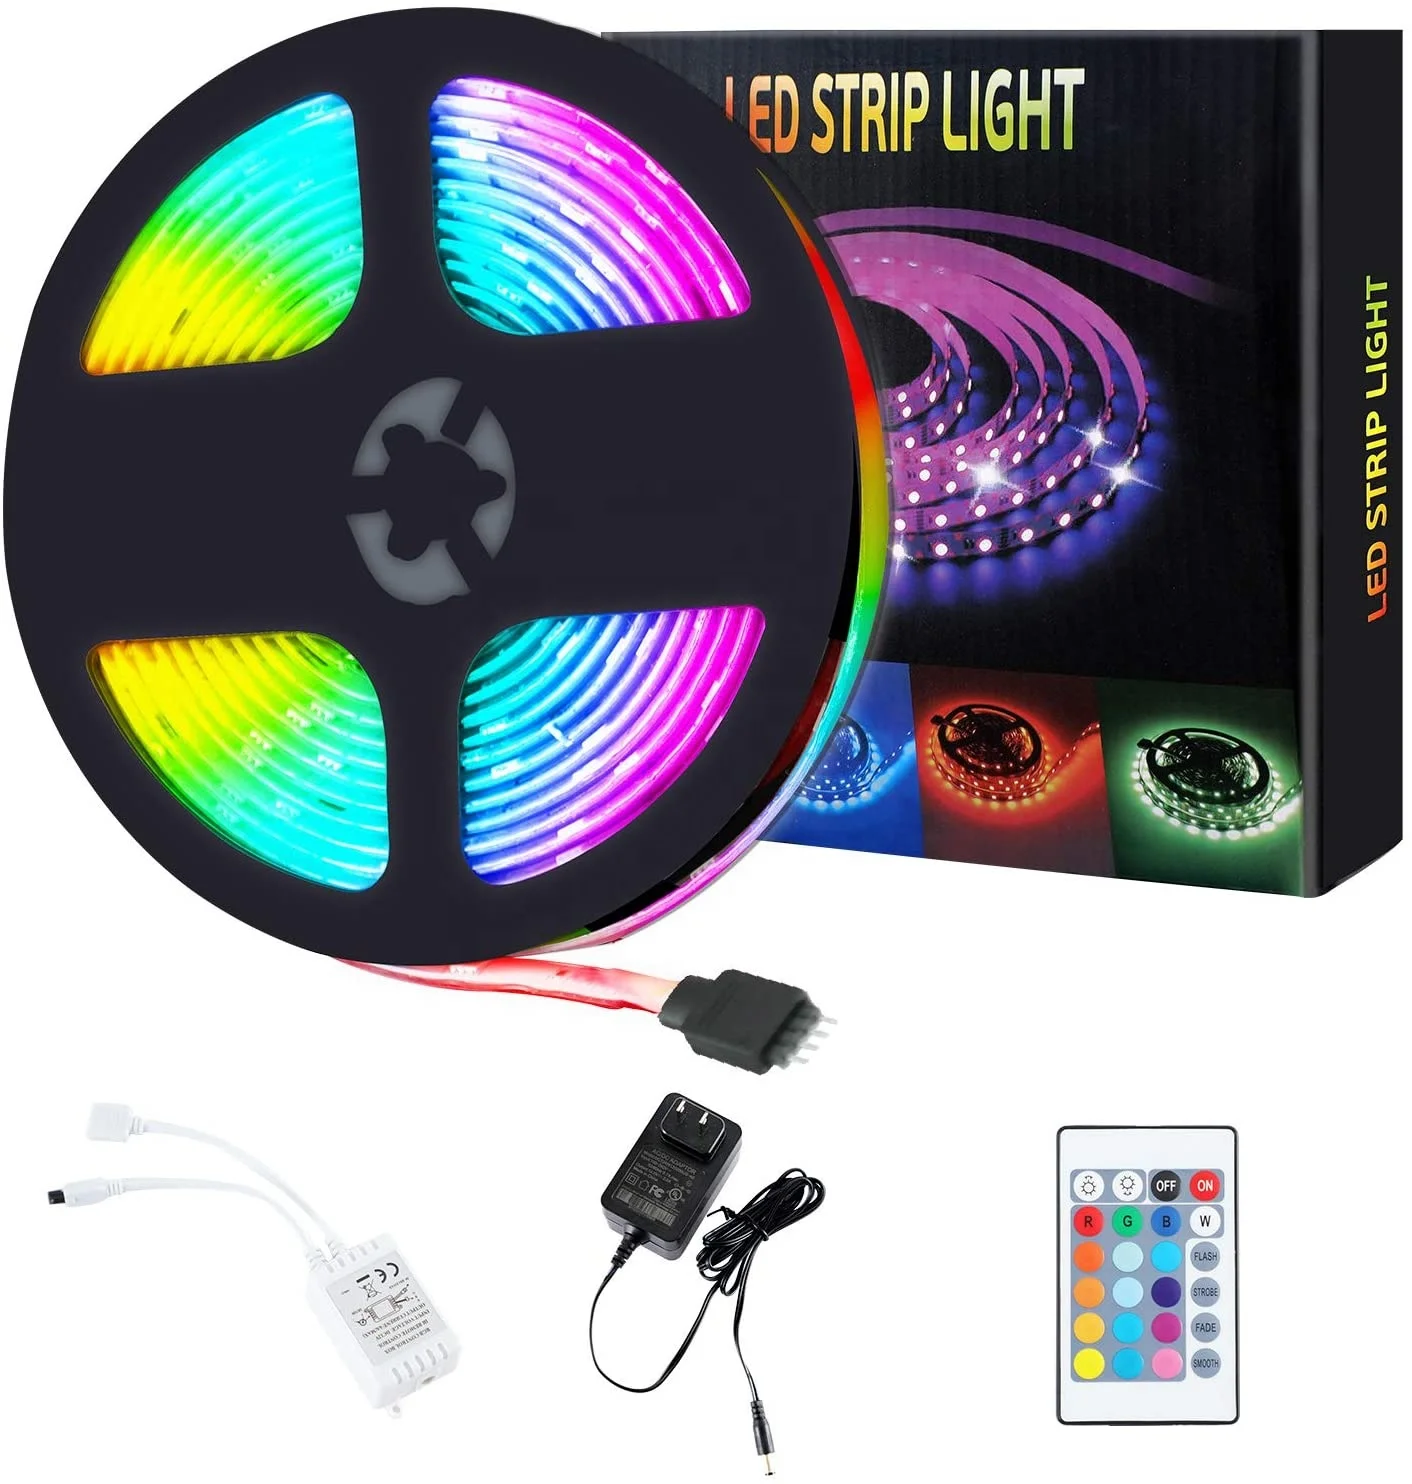 LED Strip Lights 16.4ft RGB 5050 Waterproof LED Tape Lights with Remote for Home Lighting